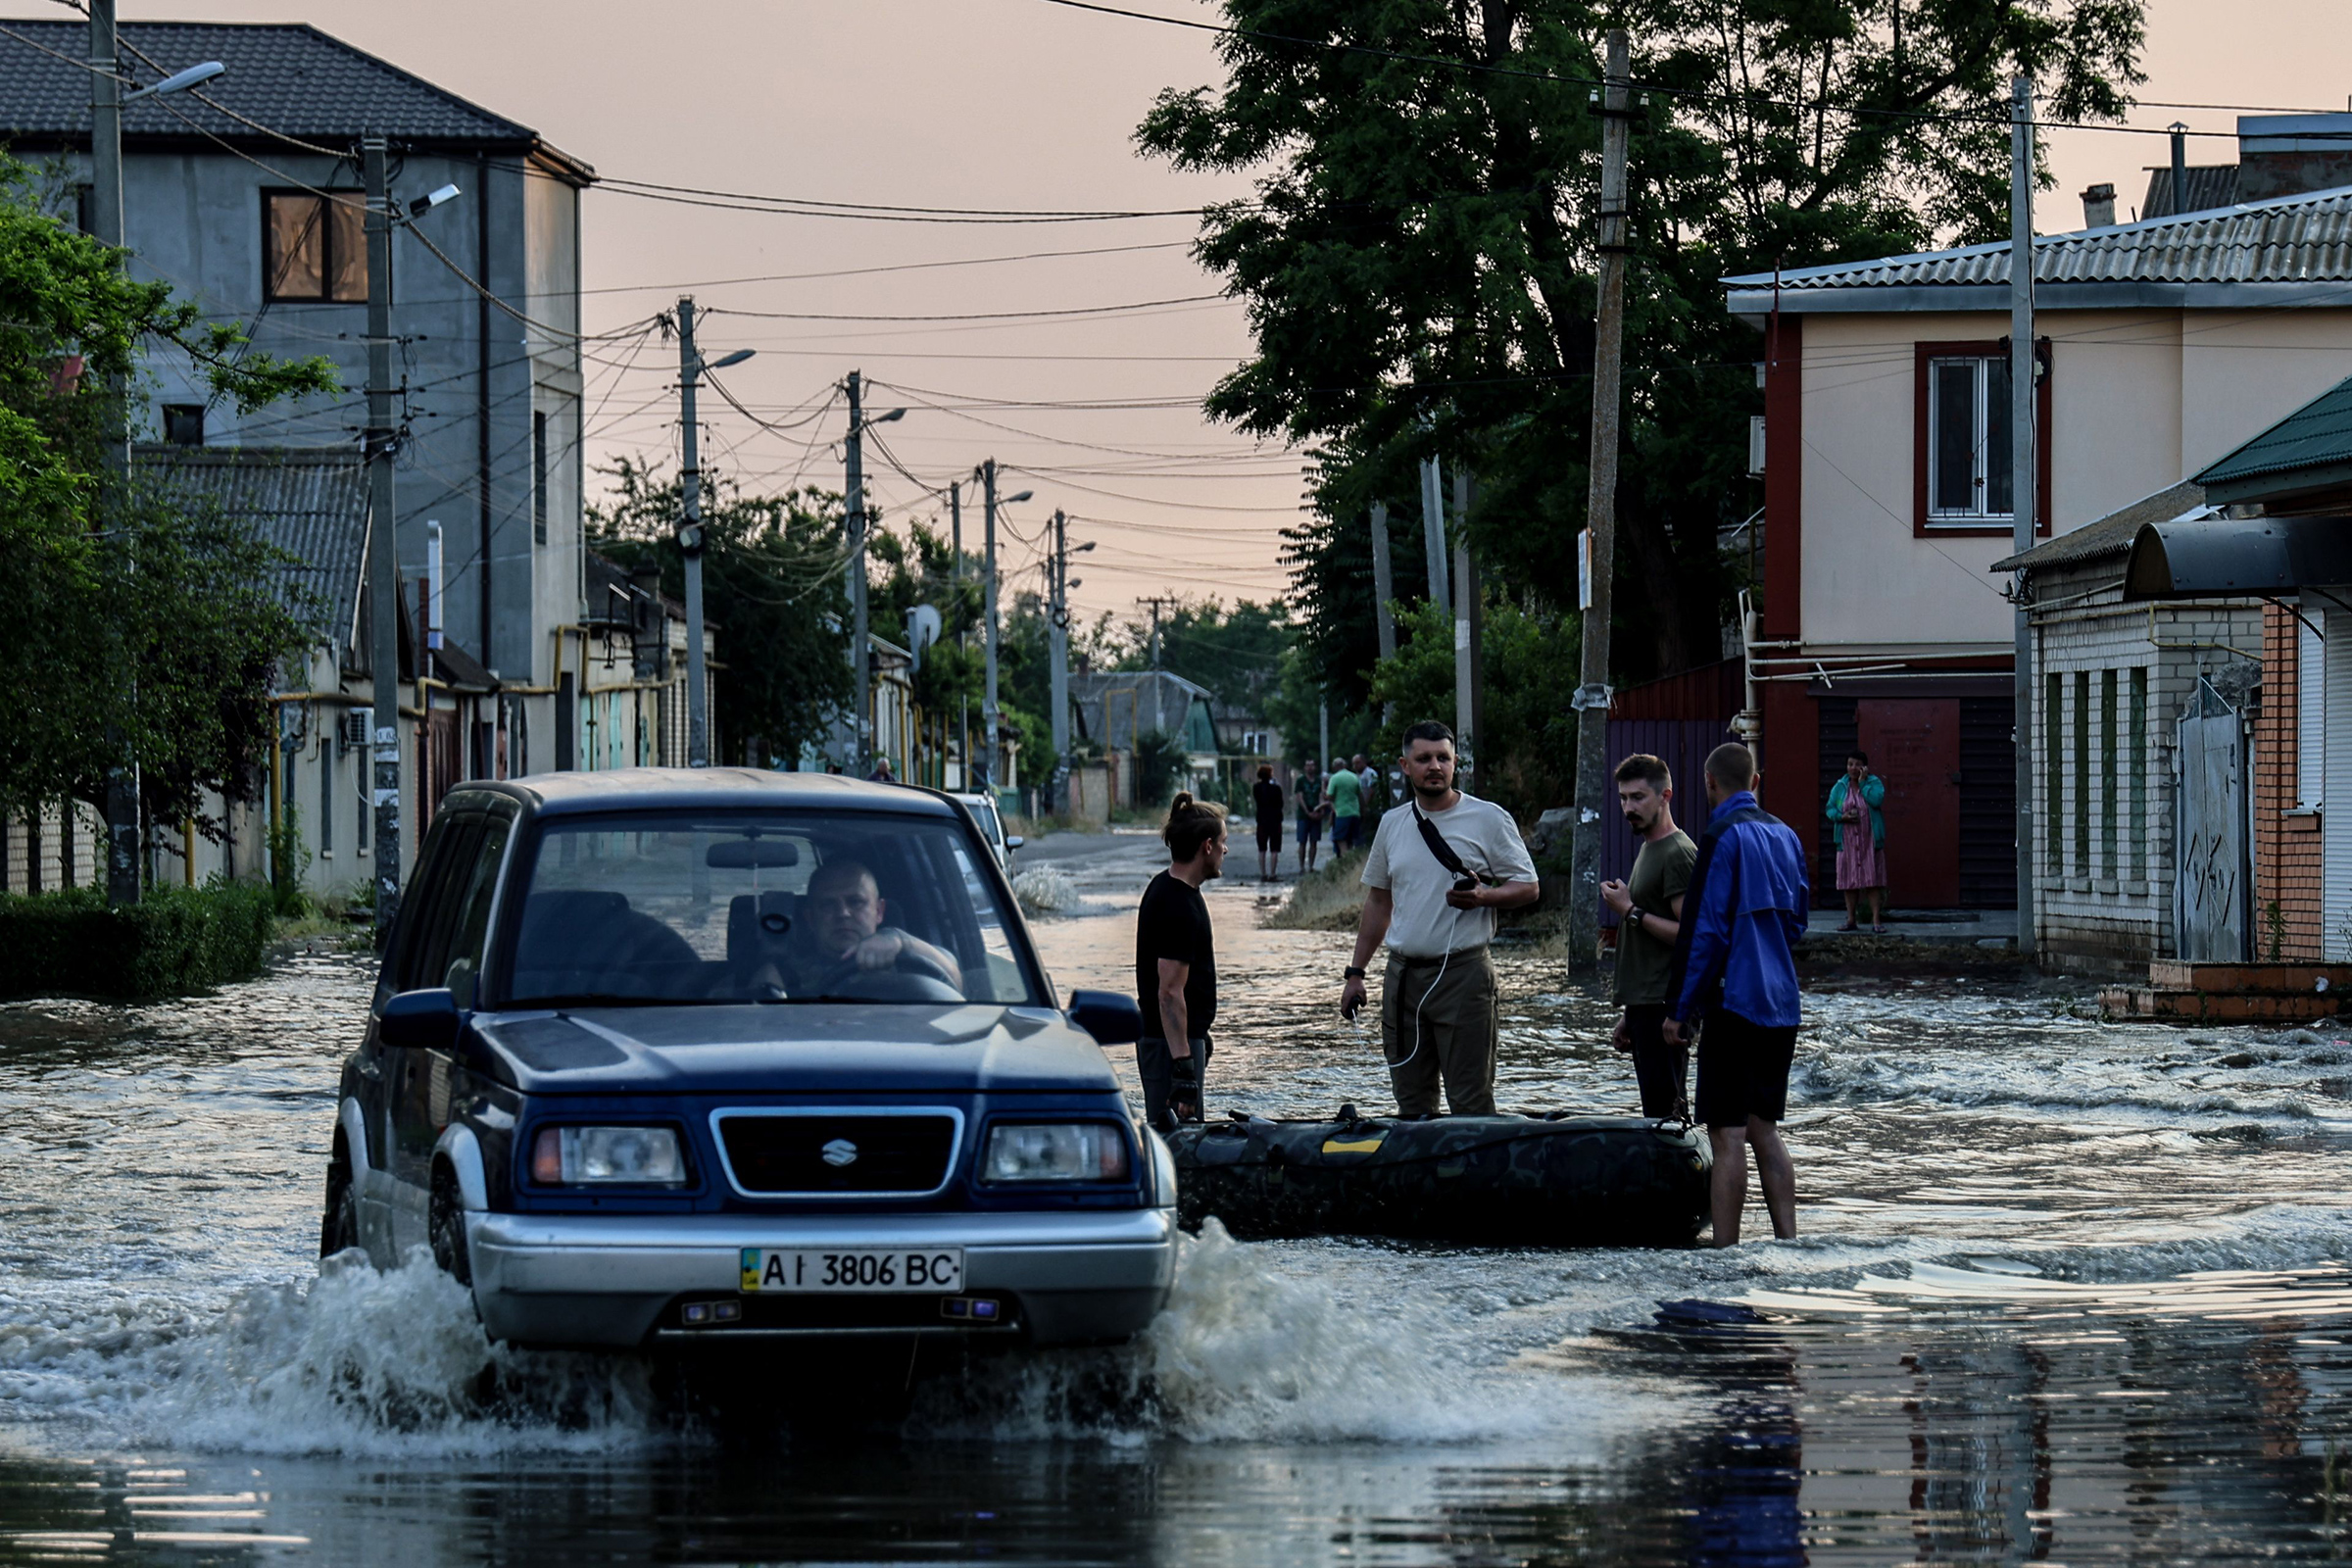 A car makes its way past people standing next to an inflatable boat, in a flooded street of Kherson on June 6. (Ivan Antypenko—EPA-EFE/Shutterstock)